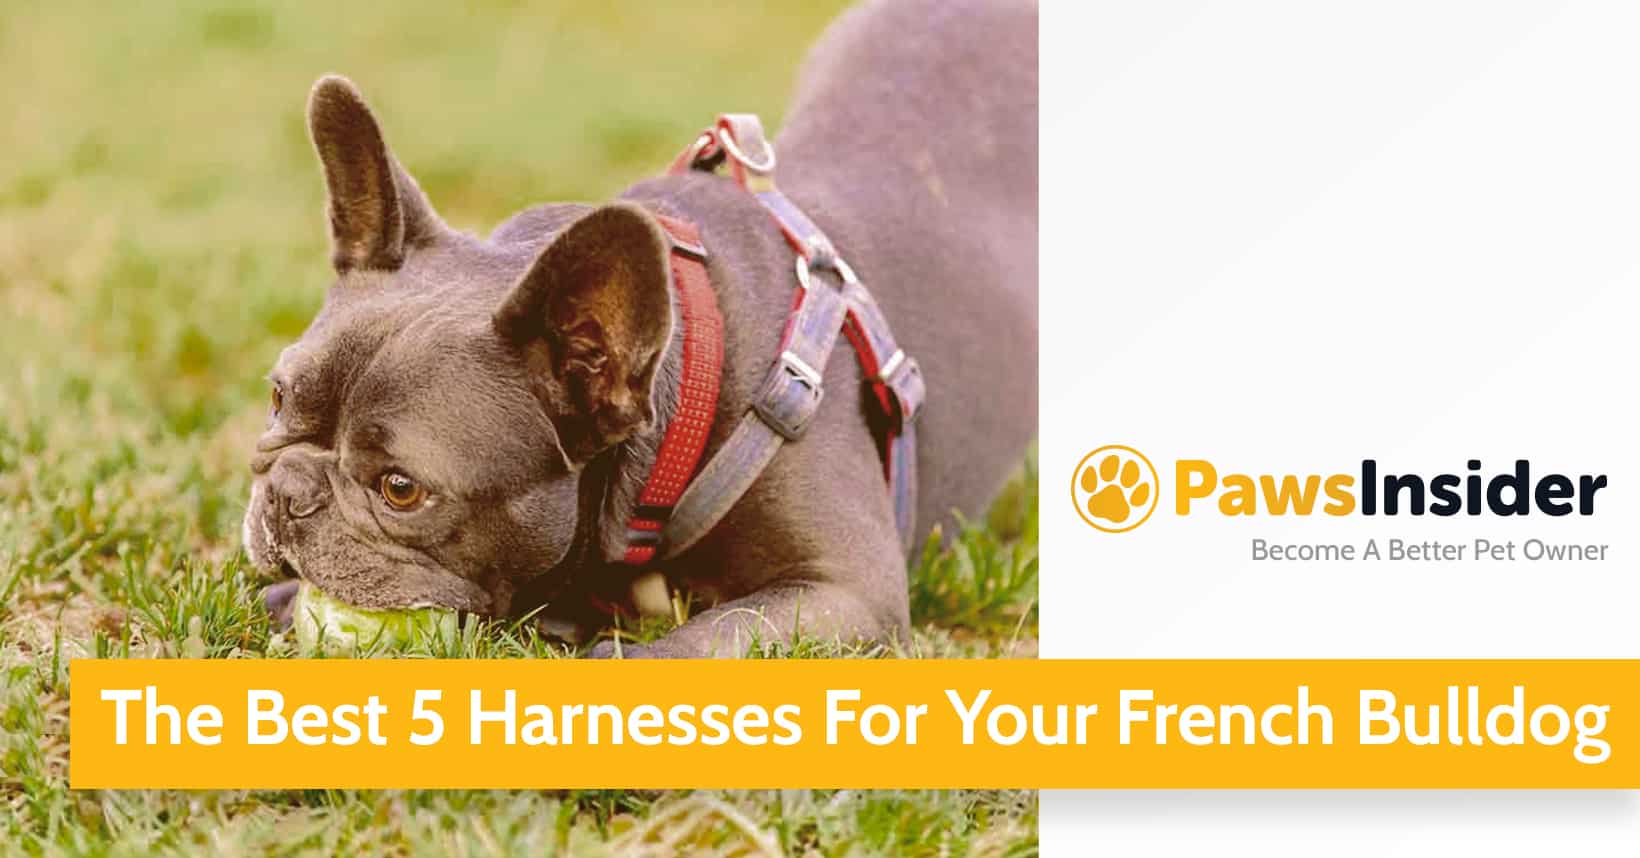 Harness Made of High-quality Leather for French Bulldog - €82.5